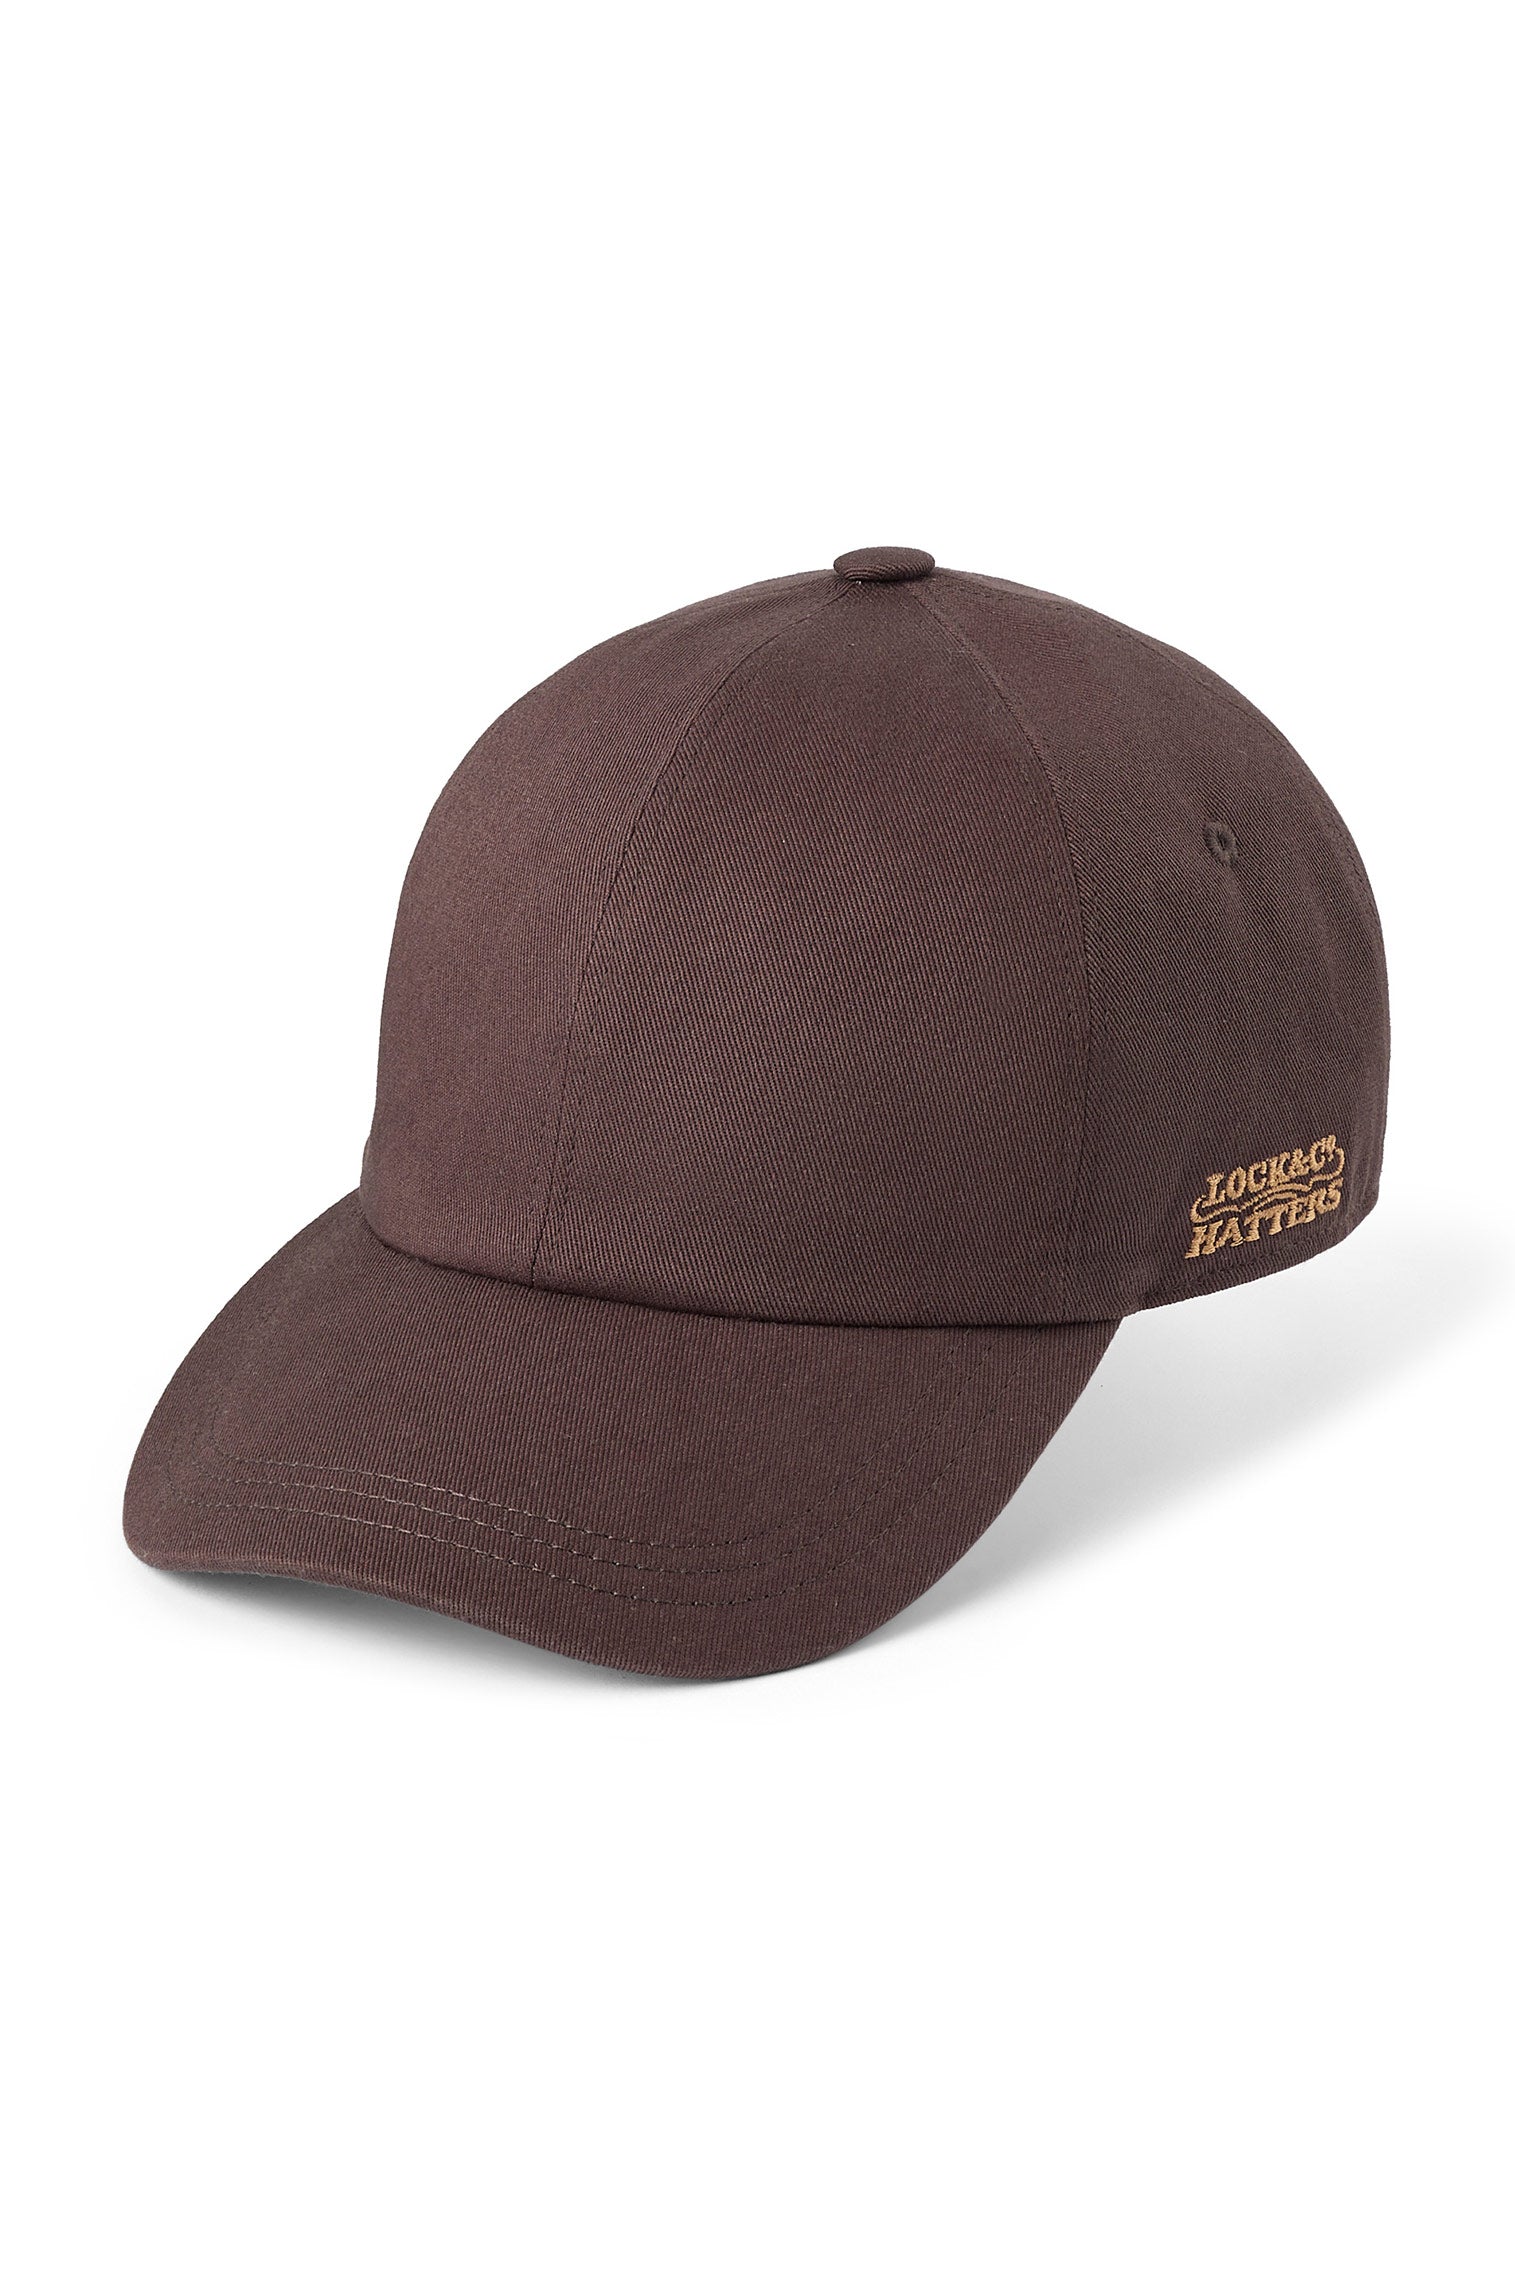 Adjustable Brown Baseball Cap - Father's Day Gift Guide - Lock & Co. Hatters London UK